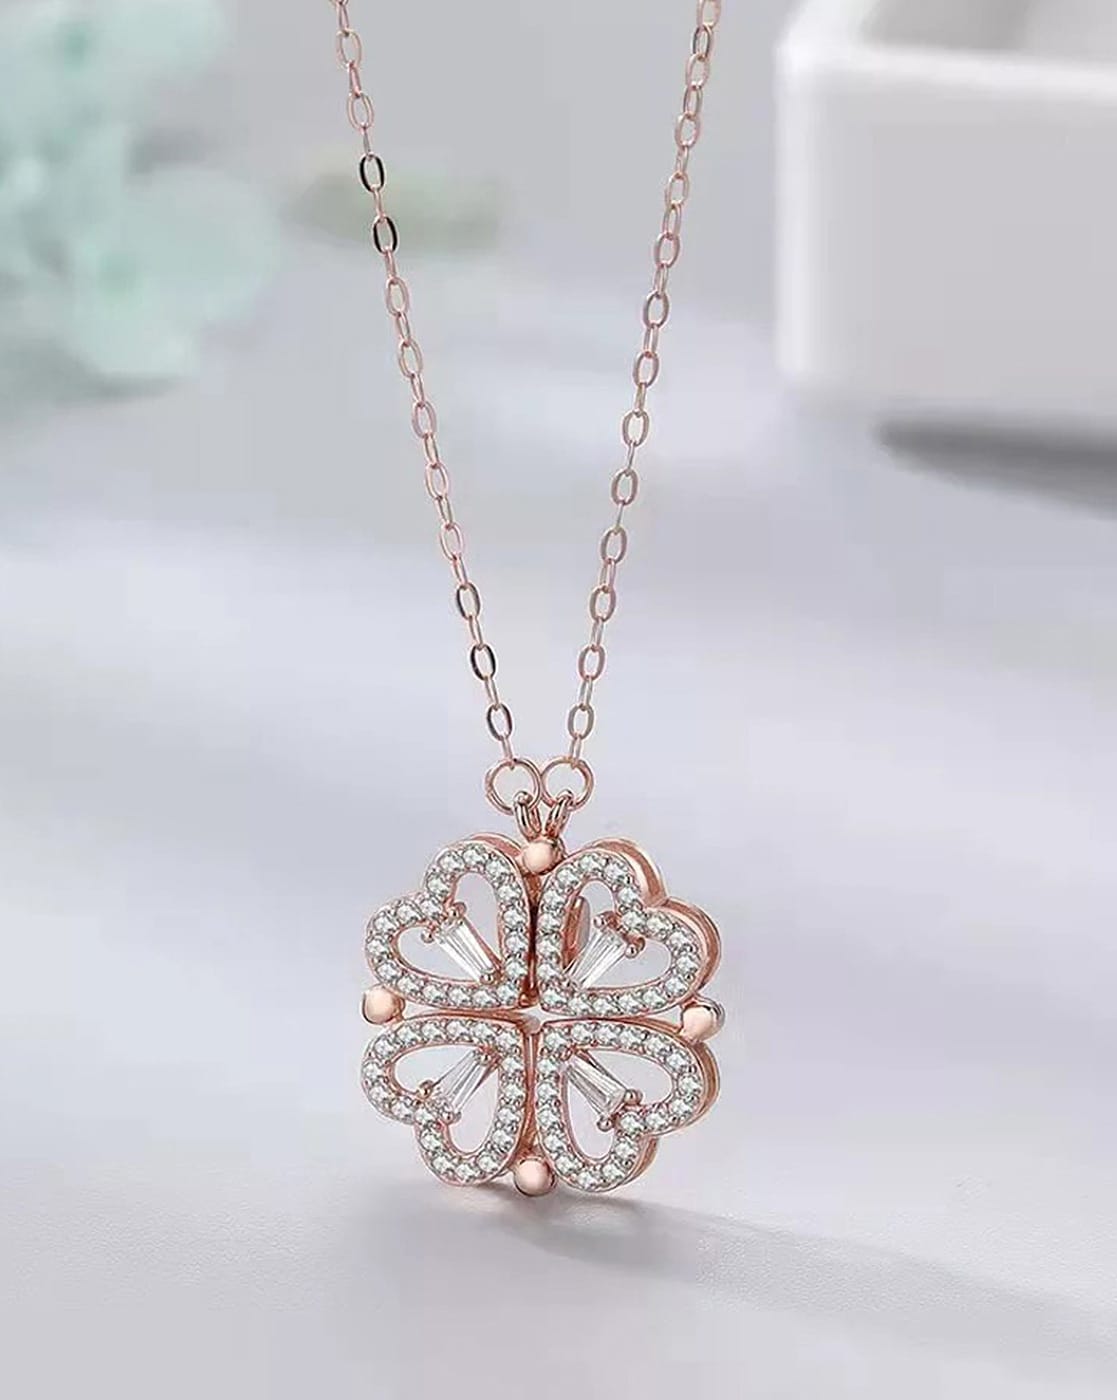 Bloomingdale's Diamond Clover Pendant Necklace in 14K White Gold, .75 ct.  t.w. - 100% Exclusive | Bloomingdale's